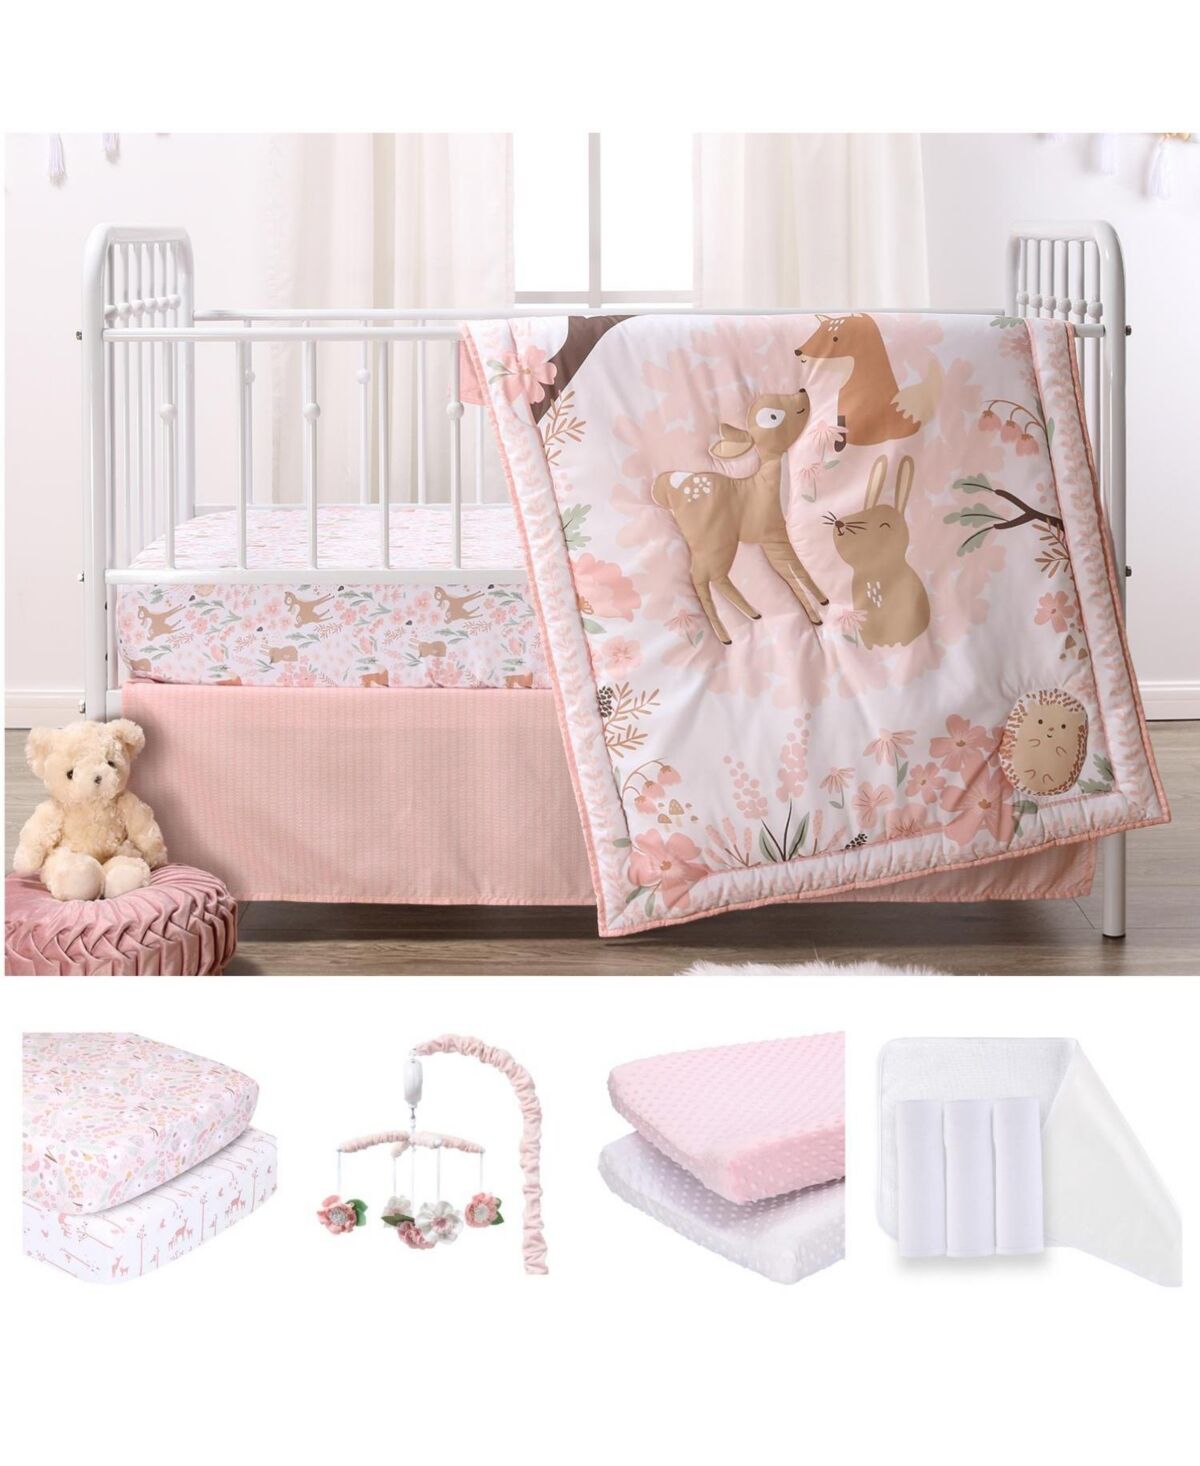 The Peanutshell Fairytale Forest 12 Piece Baby Nursery Crib Bedding Set, Quilt, Crib Sheets, Crib Skirt, Changing Pad Covers and Liners, and Mobile -